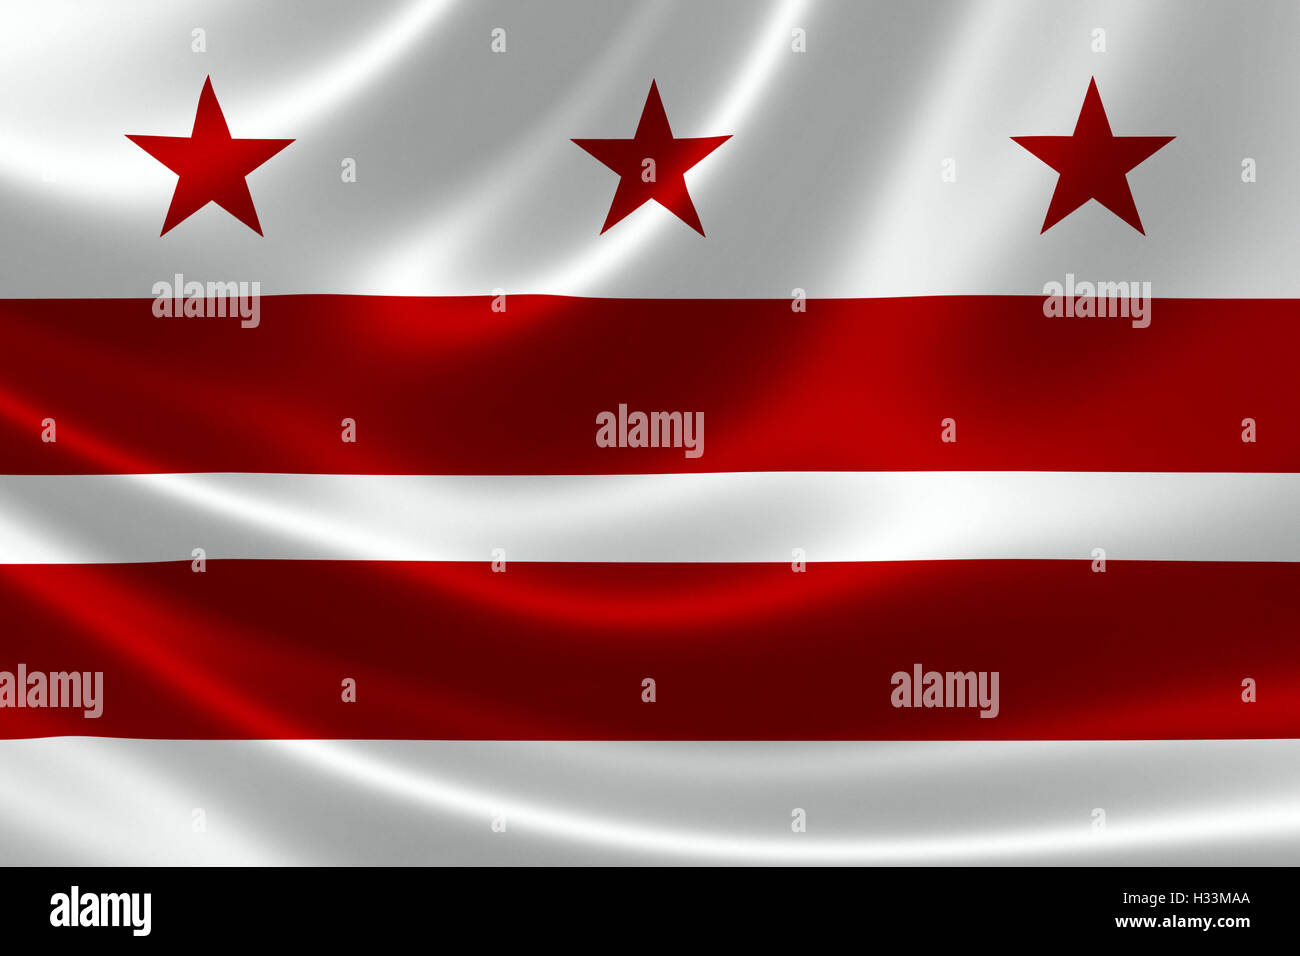 3D rendering of the flag of District of Columbia (Washington DC) on satin texture. Stock Photo